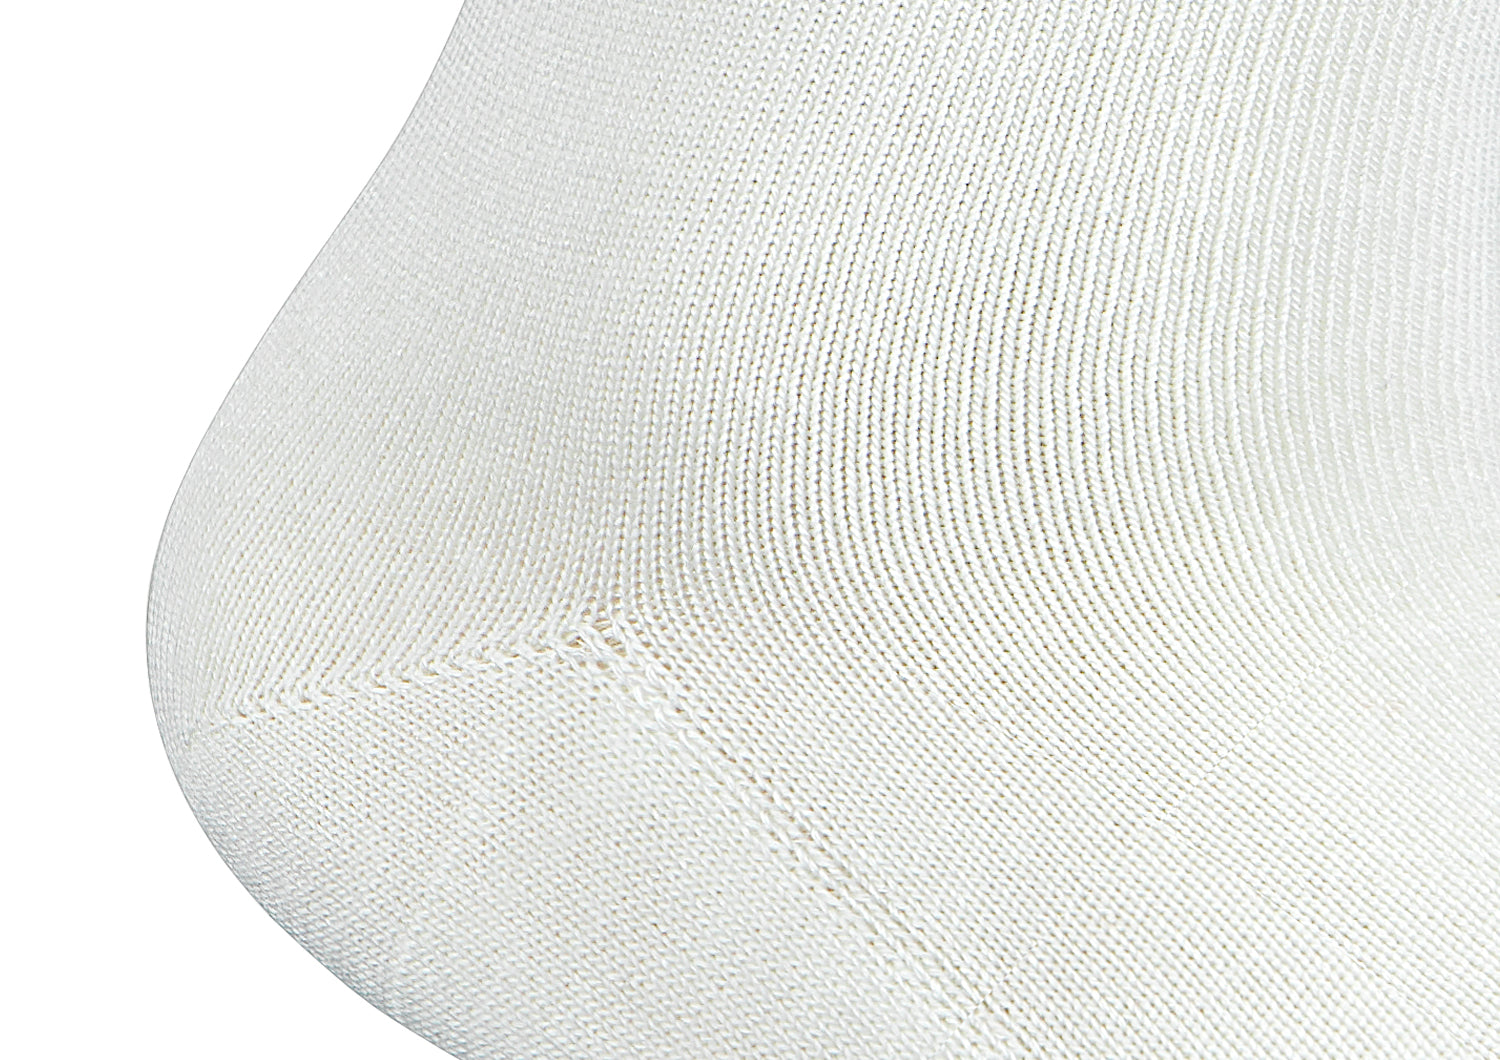 Bunion Relief Padded Low Cut Socks White